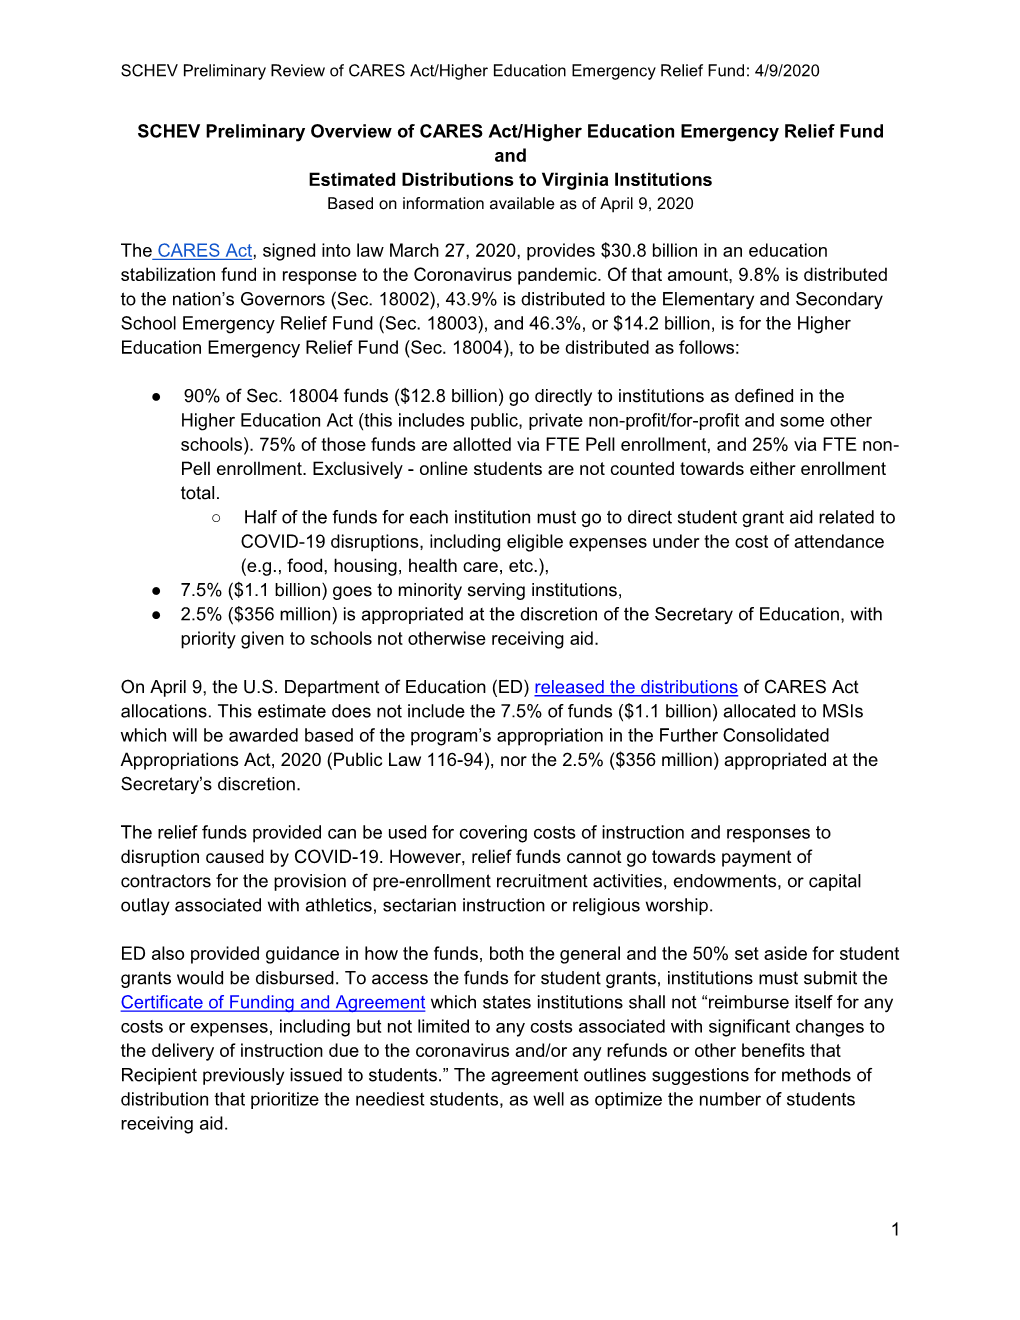 SCHEV Preliminary Review of CARES Act/Higher Education Emergency Relief Fund: 4/9/2020